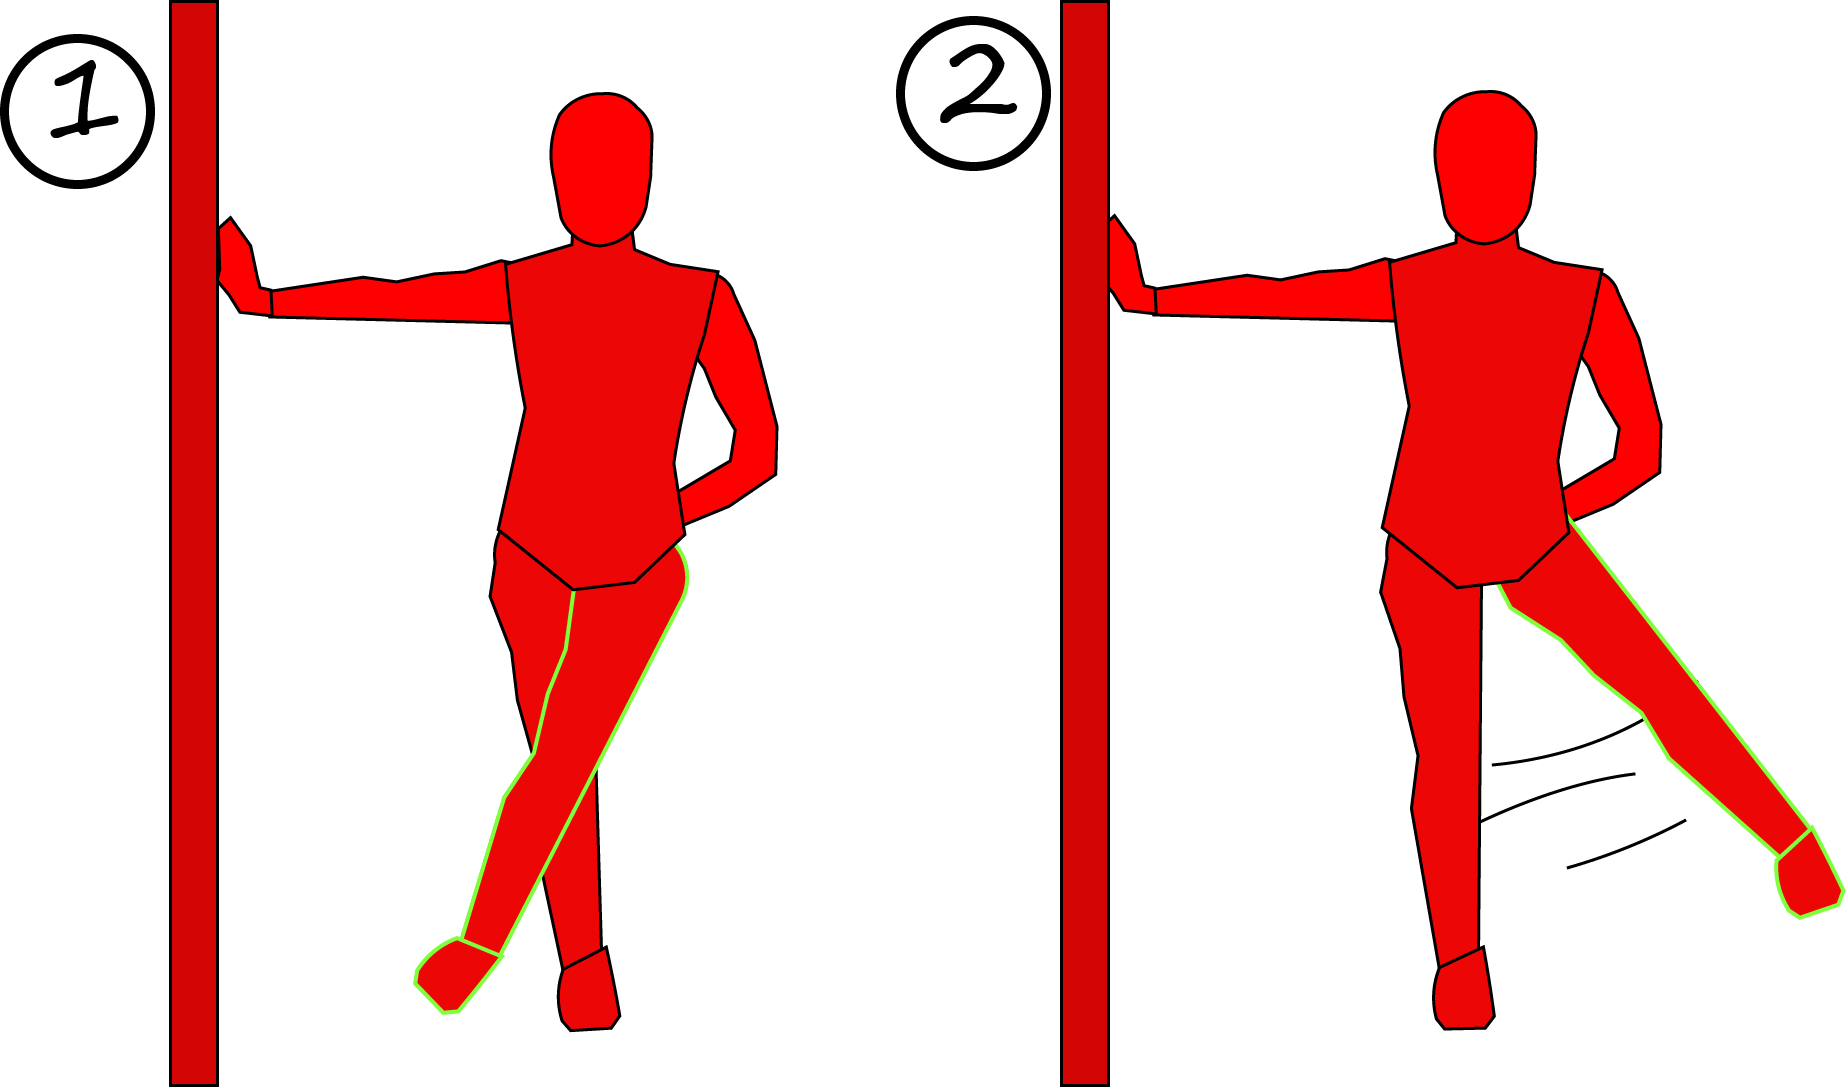 Illustration demonstrating proper technique for leg swings against a wall, standing position. The first half depicts the starting position, while the second half showcases controlled swinging of the leg, specifically targeting the injured knee